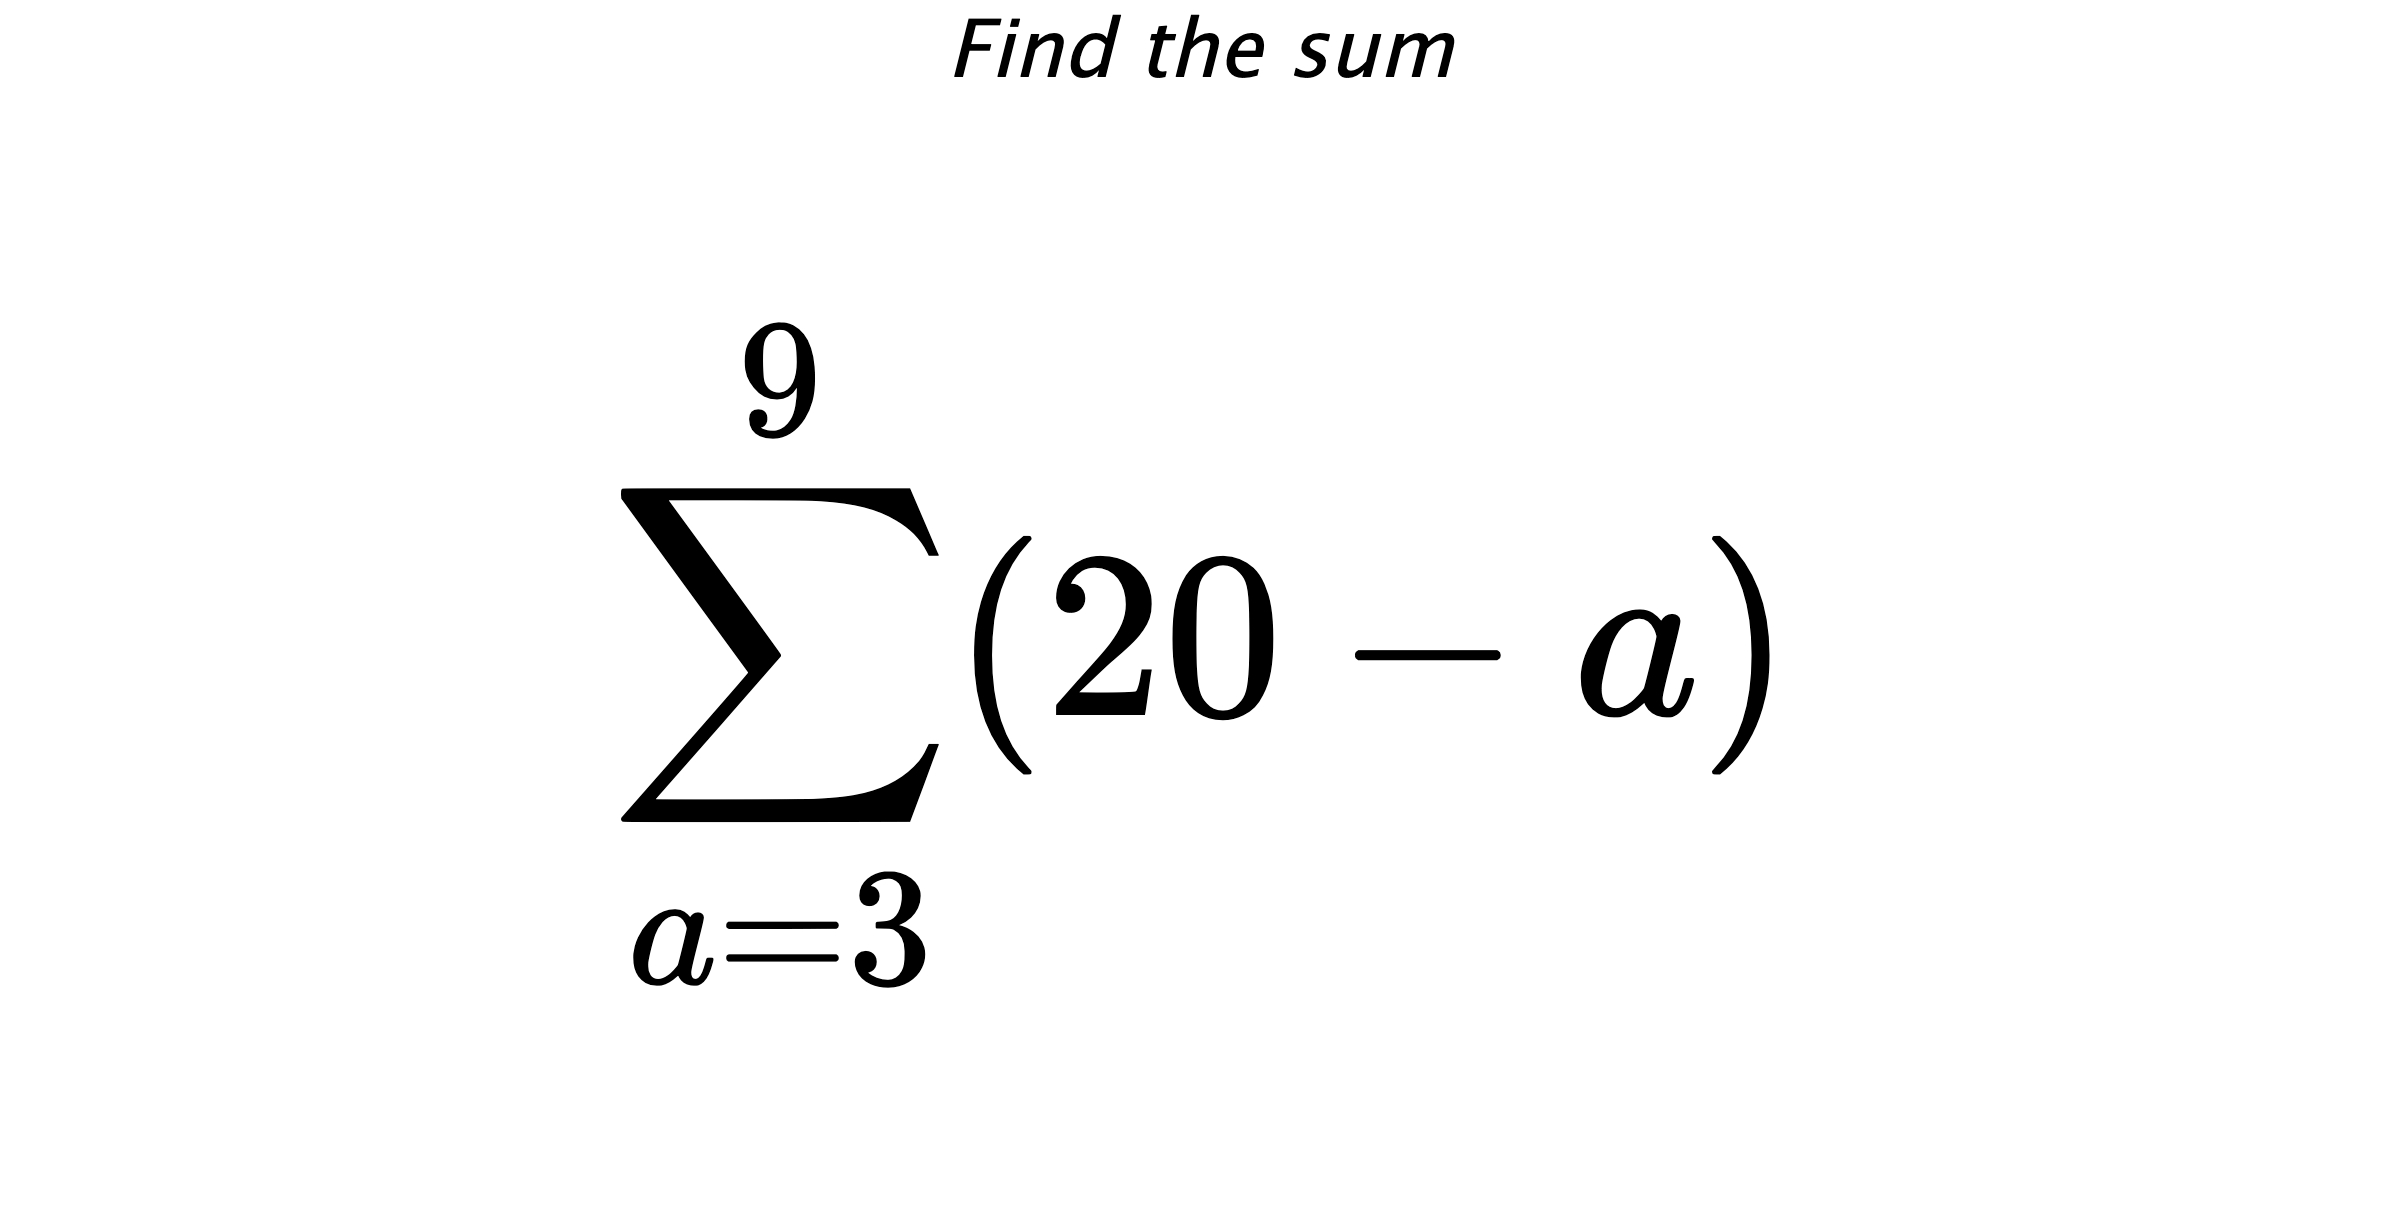 Find the sum $$ \sum_{a=3}^{9} (20-a)$$